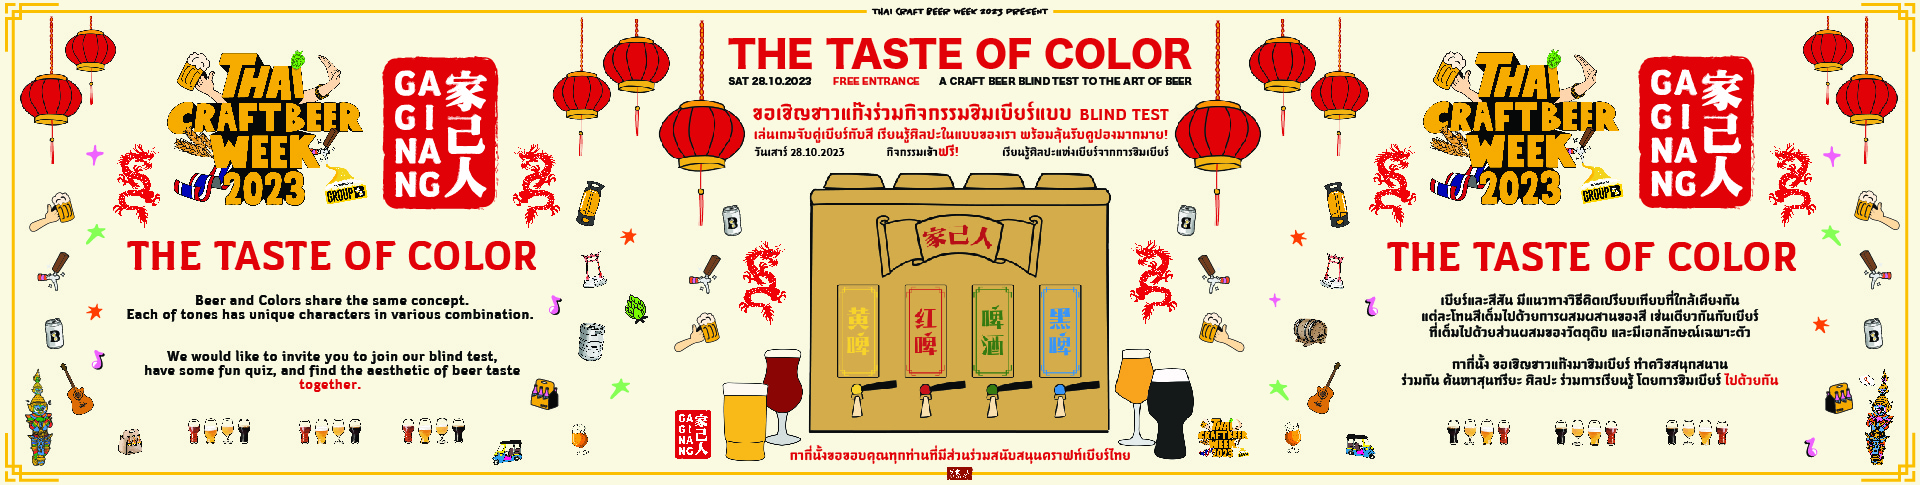 The Taste of Color: From Blind Test to The Art of Beer